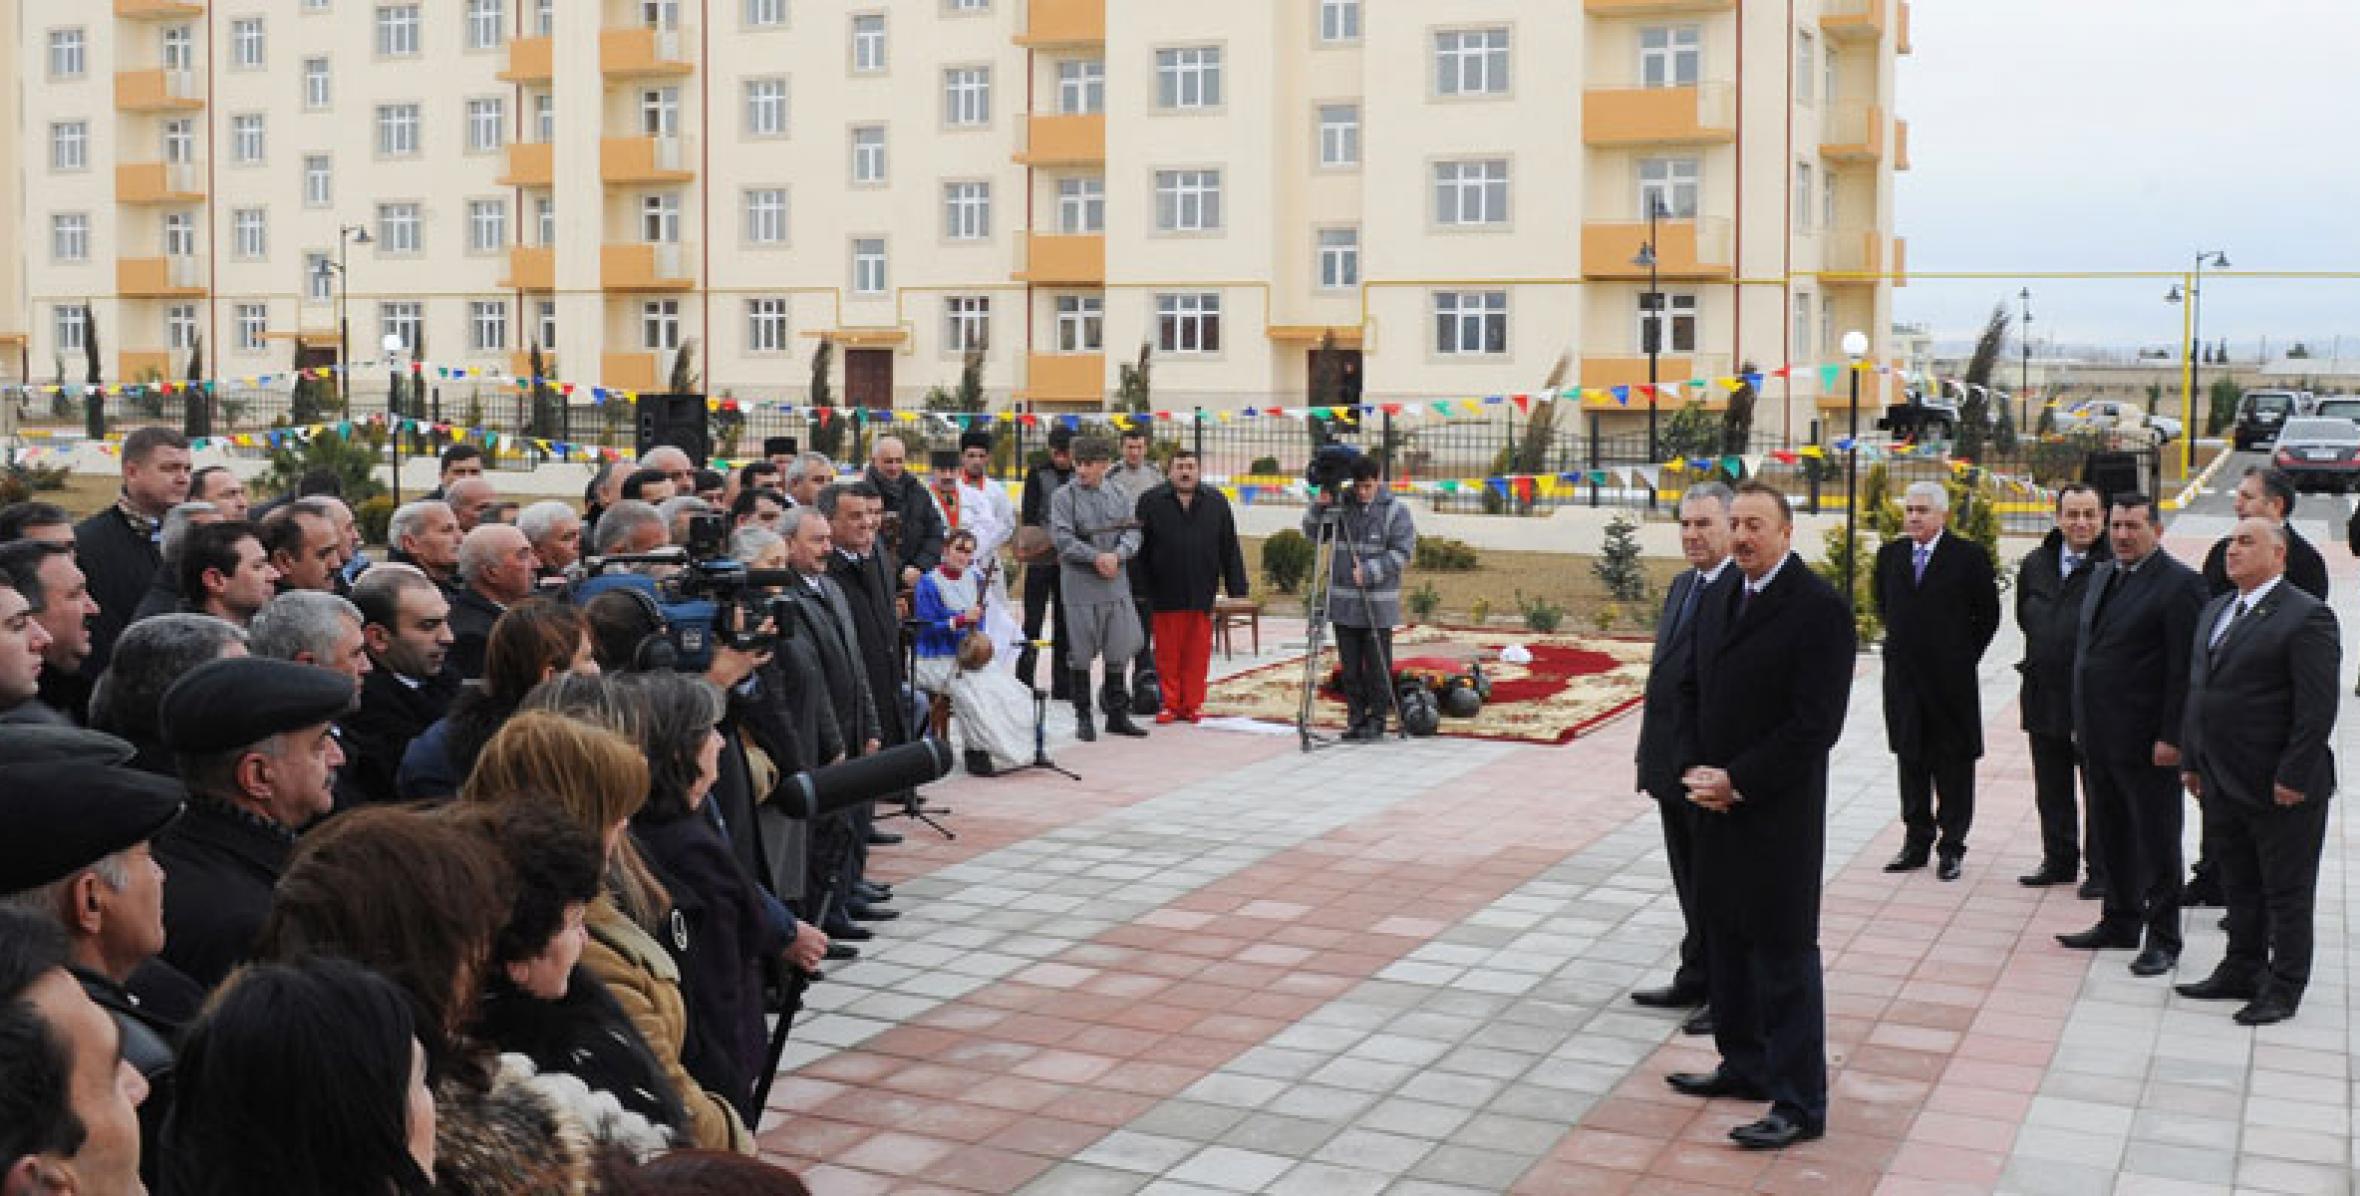 Speech by Ilham Aliyev at the opening of a new settlement for IDPs in Goranboy